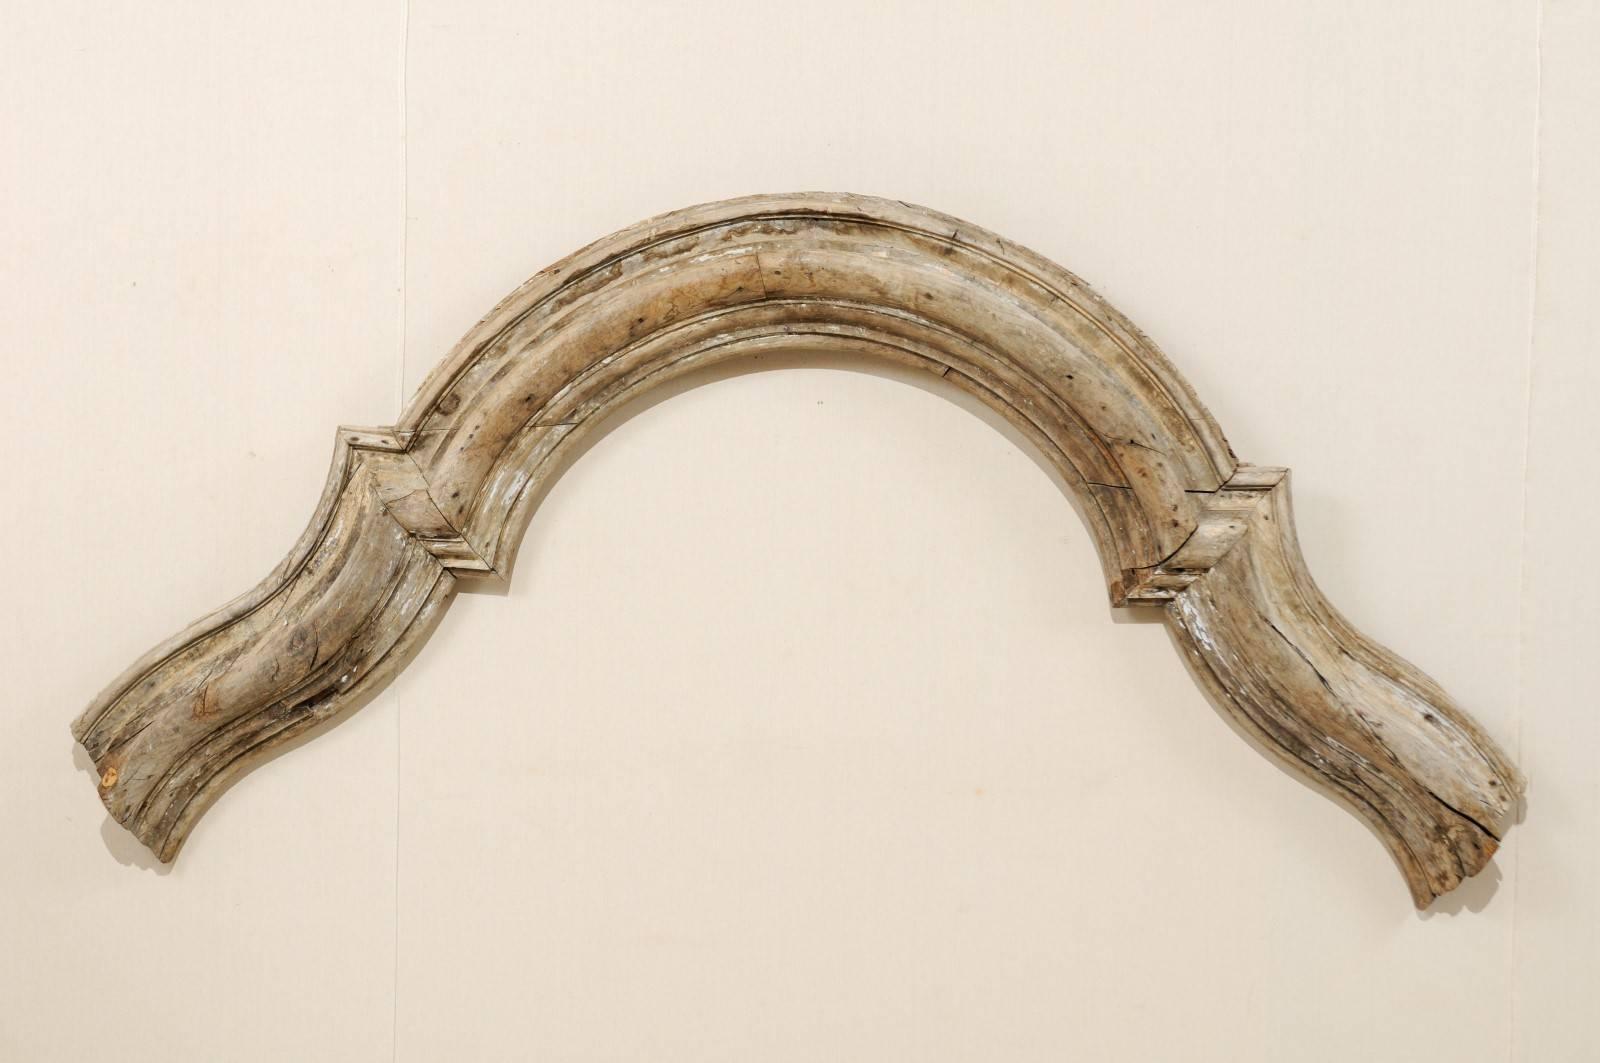 A large-sized Italian architectural ornament with overall arching bracket shape from the late 18th century. This large-scale Italian carved wood architectural ornament has a convex shaped arch with natural wood finish. This piece is in very good,